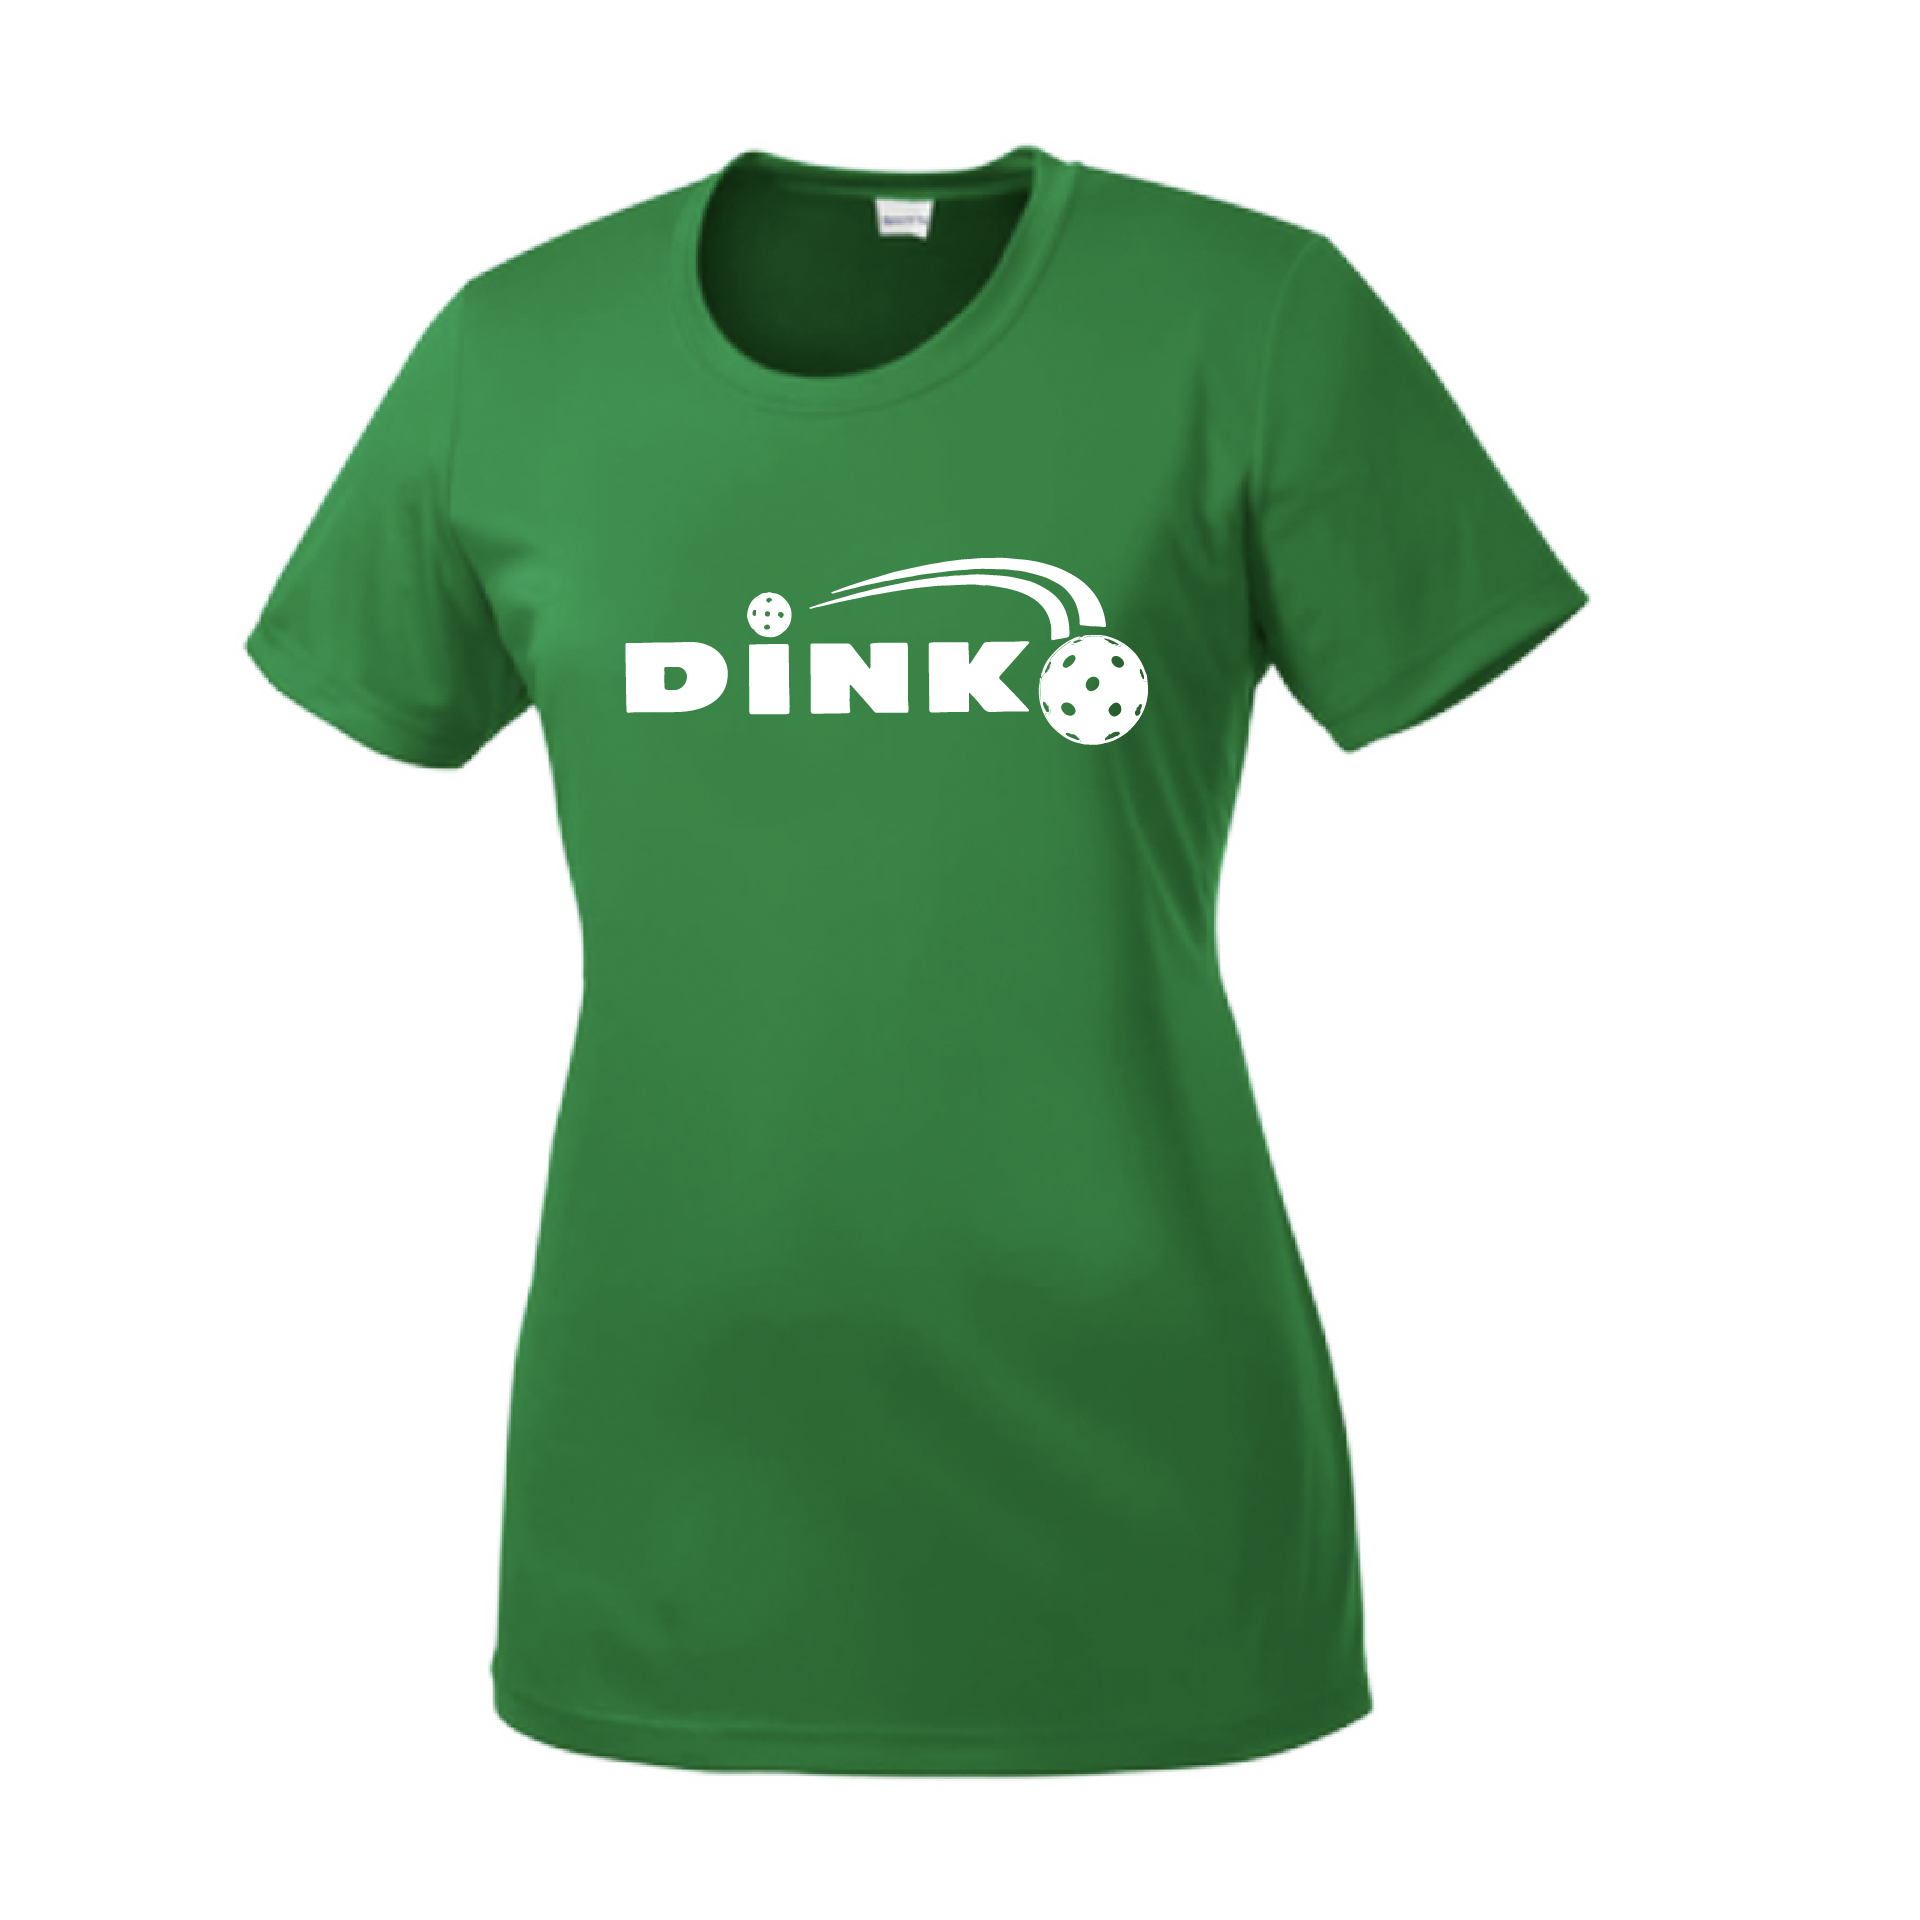 Pickleball Design: Dink  Women's Styles: Short Sleeve Crew-Neck  Turn up the volume in this Women's shirt with its perfect mix of softness and attitude. Material is ultra-comfortable with moisture wicking properties and tri-blend softness. PosiCharge technology locks in color. Highly breathable and lightweight.